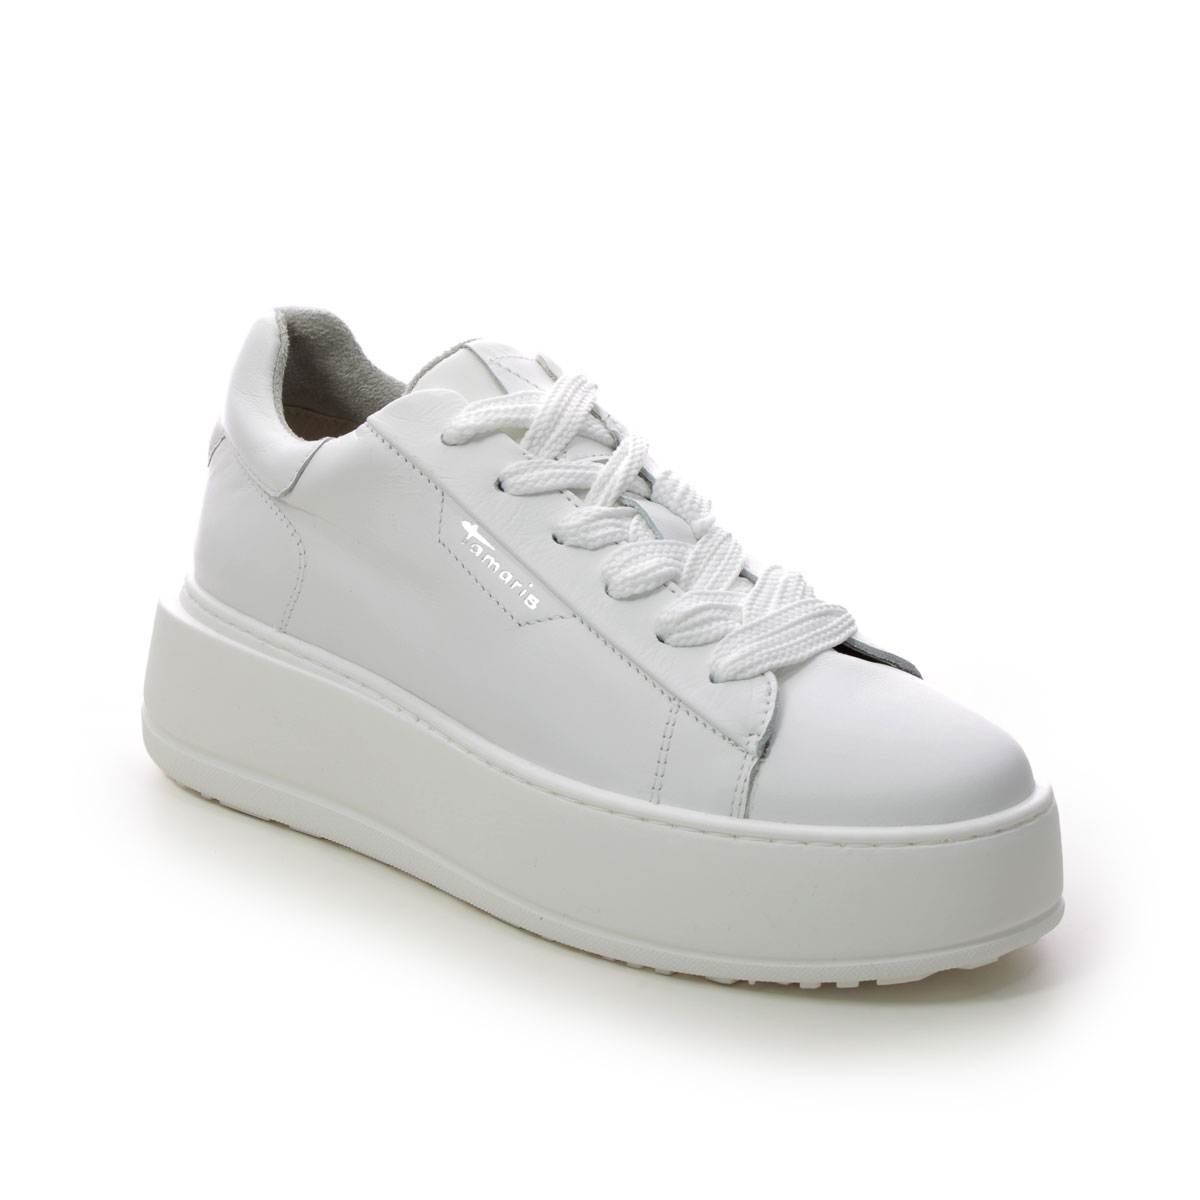 Tamaris Platform 50 White Leather Womens Trainers 23812-20-117 In Size 40 In Plain White Leather